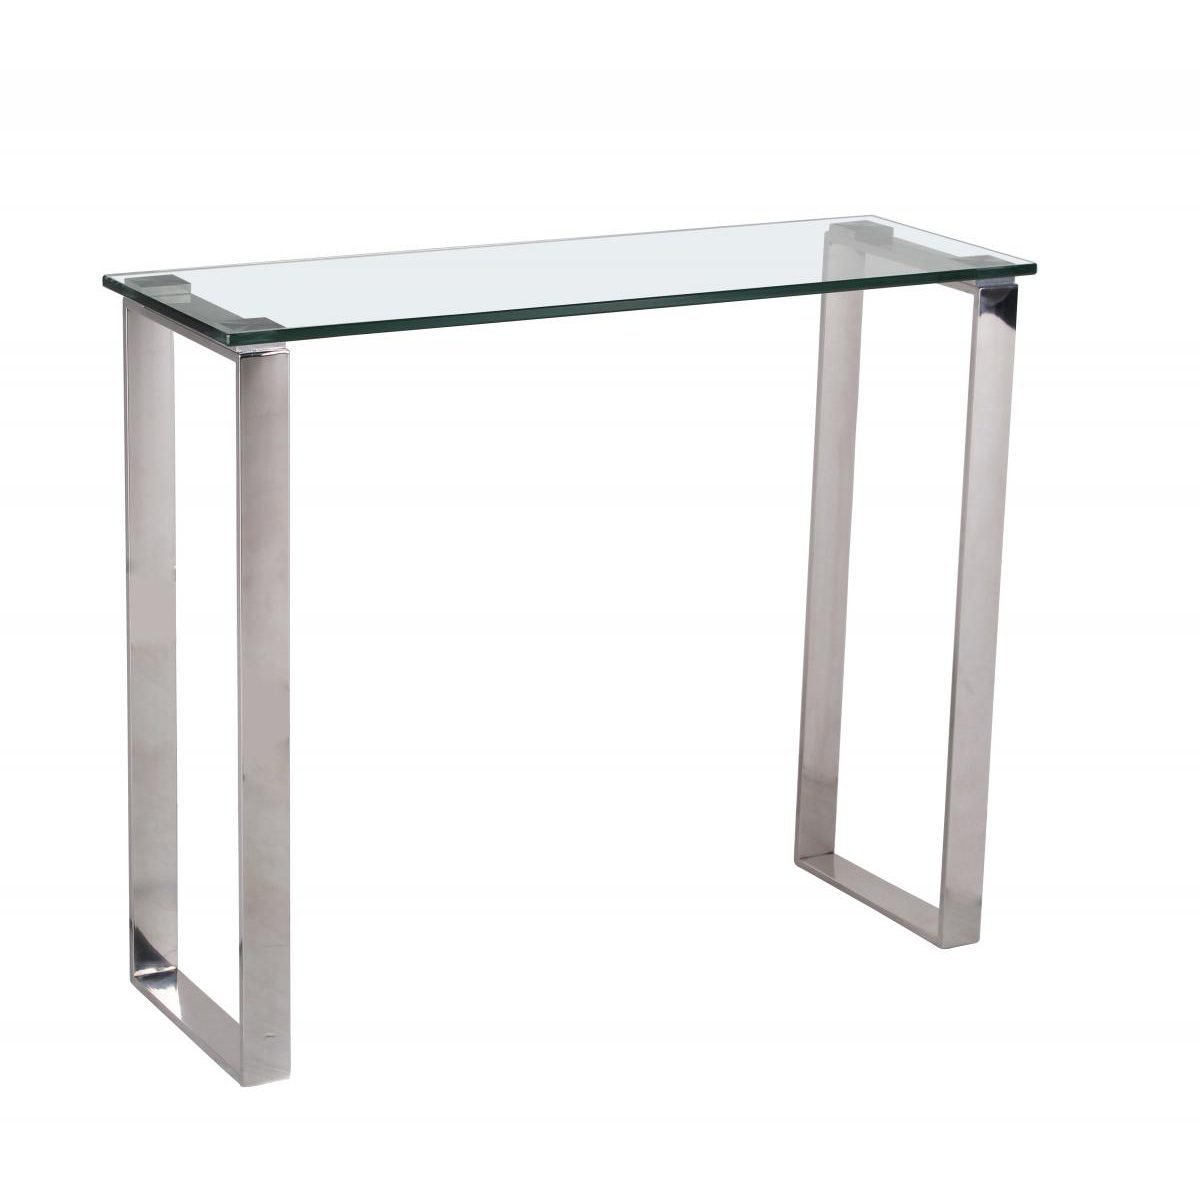 Carter Glass Console Table with Stainless Steel Legs - Grab Some Furniture